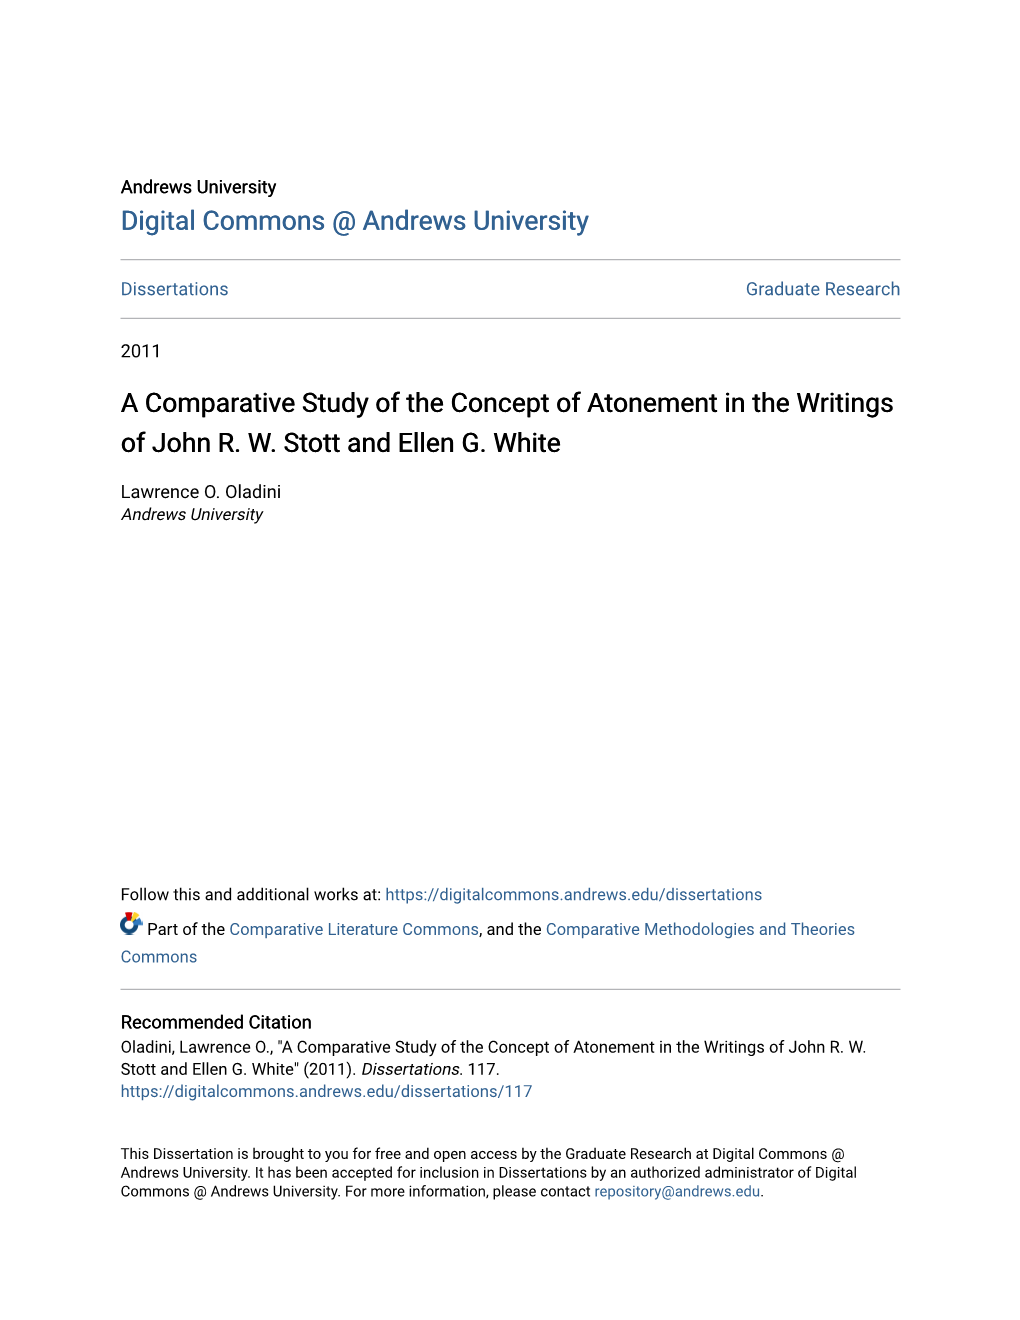 A Comparative Study of the Concept of Atonement in the Writings of John R